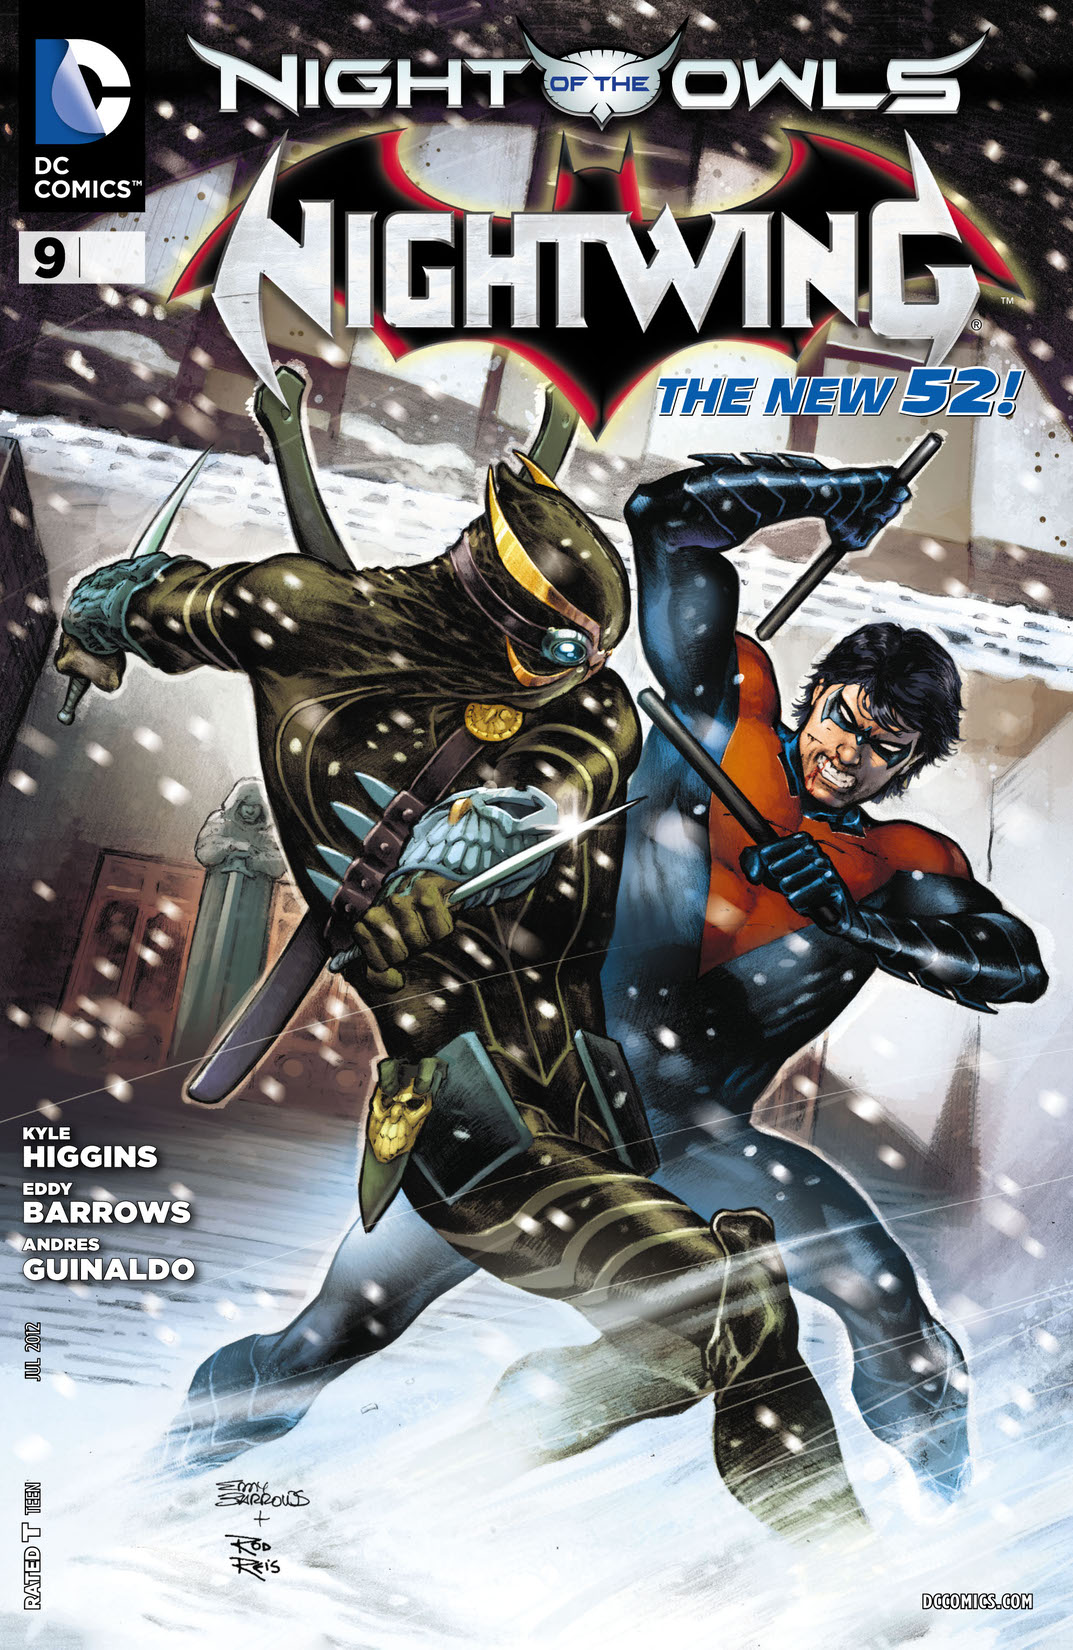 Nightwing (2011-) #9 preview images